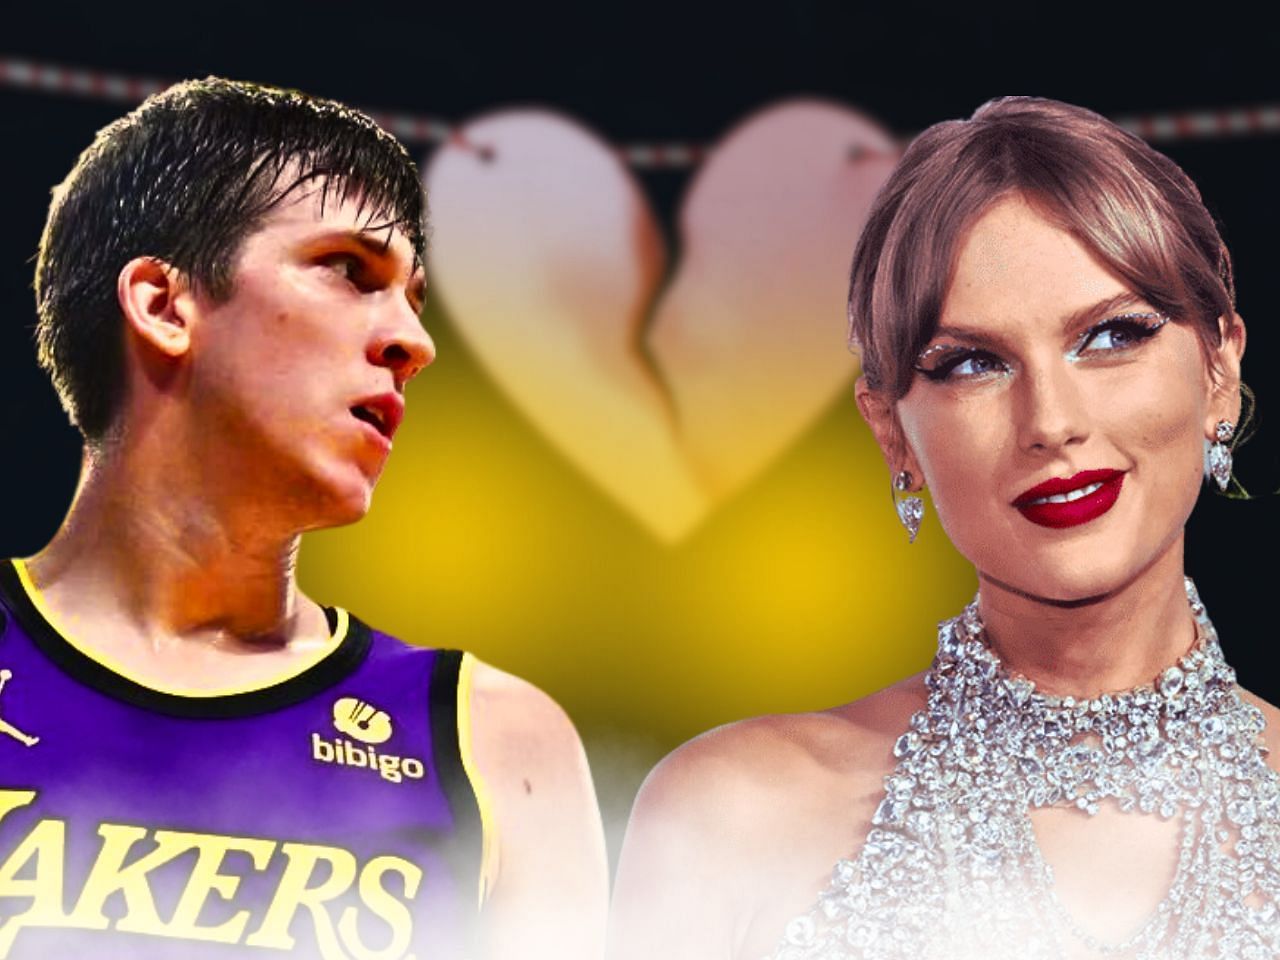 Austin Reaves squashes rumor of dating Taylor Swift